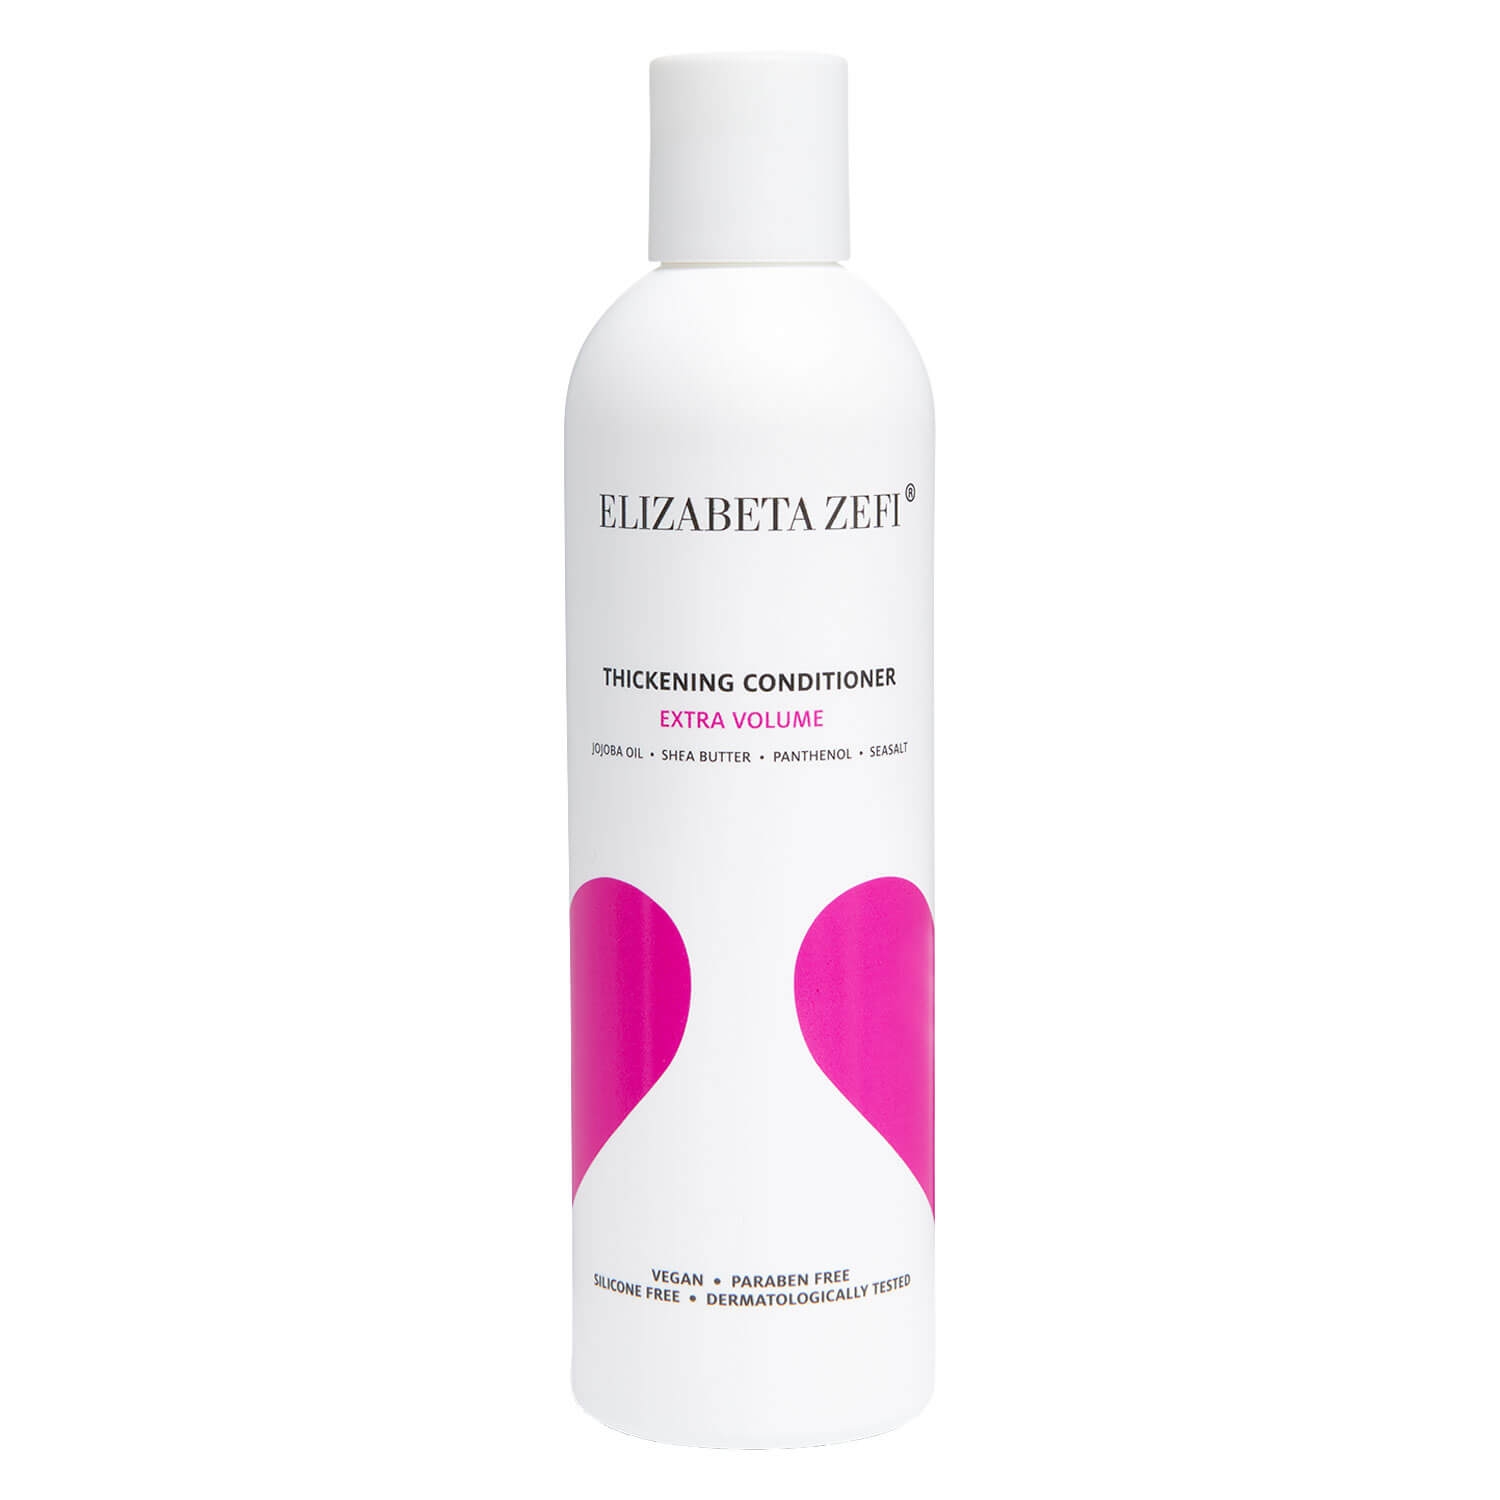 Product image from Elizabeta Zefi - Thickening Conditioner